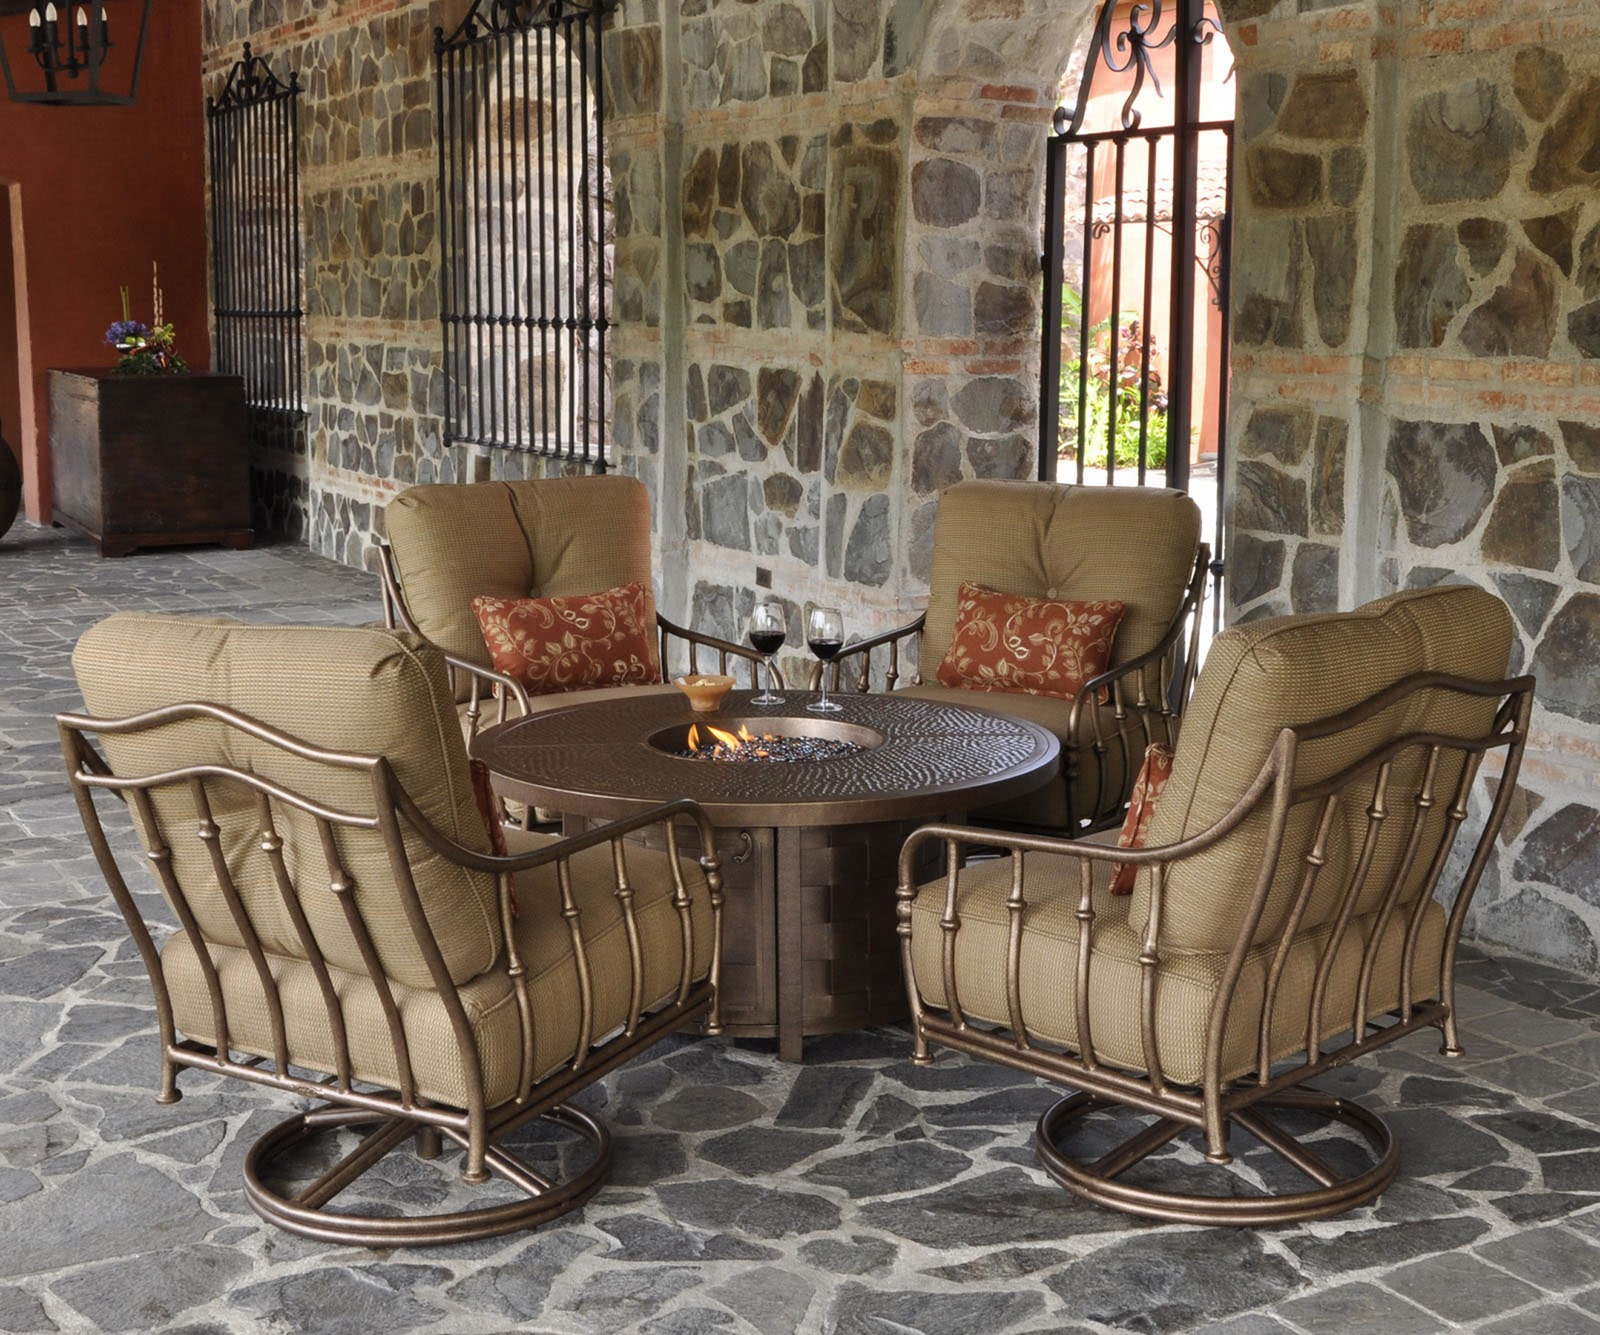 Dine With Adventure - Add a Fire Pit Dining Table to your Outdoor Room